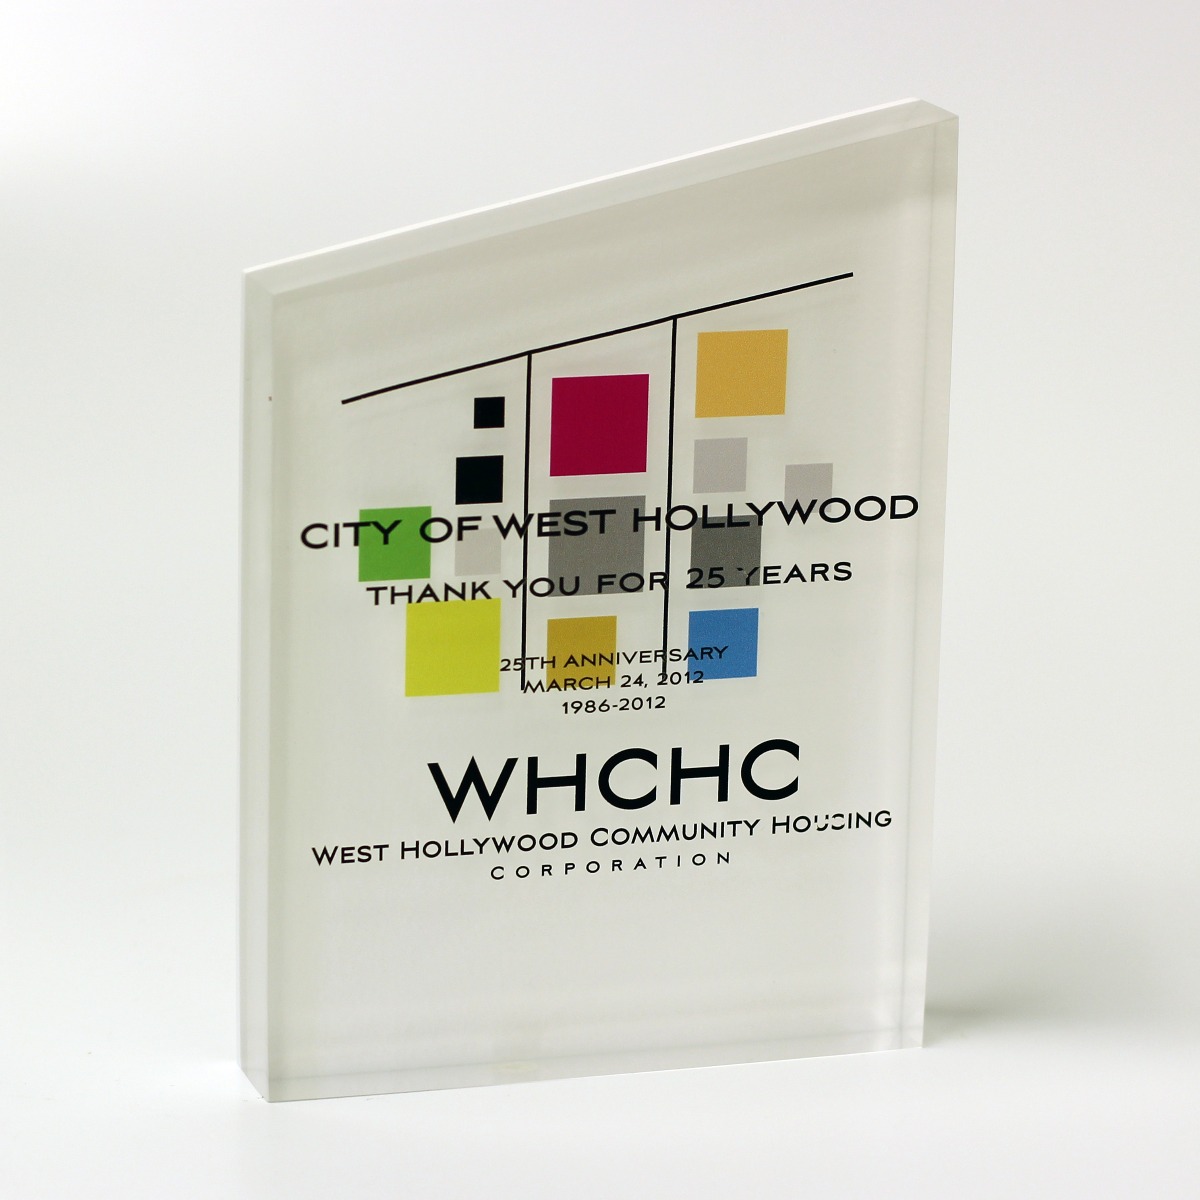 3 dimensional Lucite award with custom shape and slanted roof 